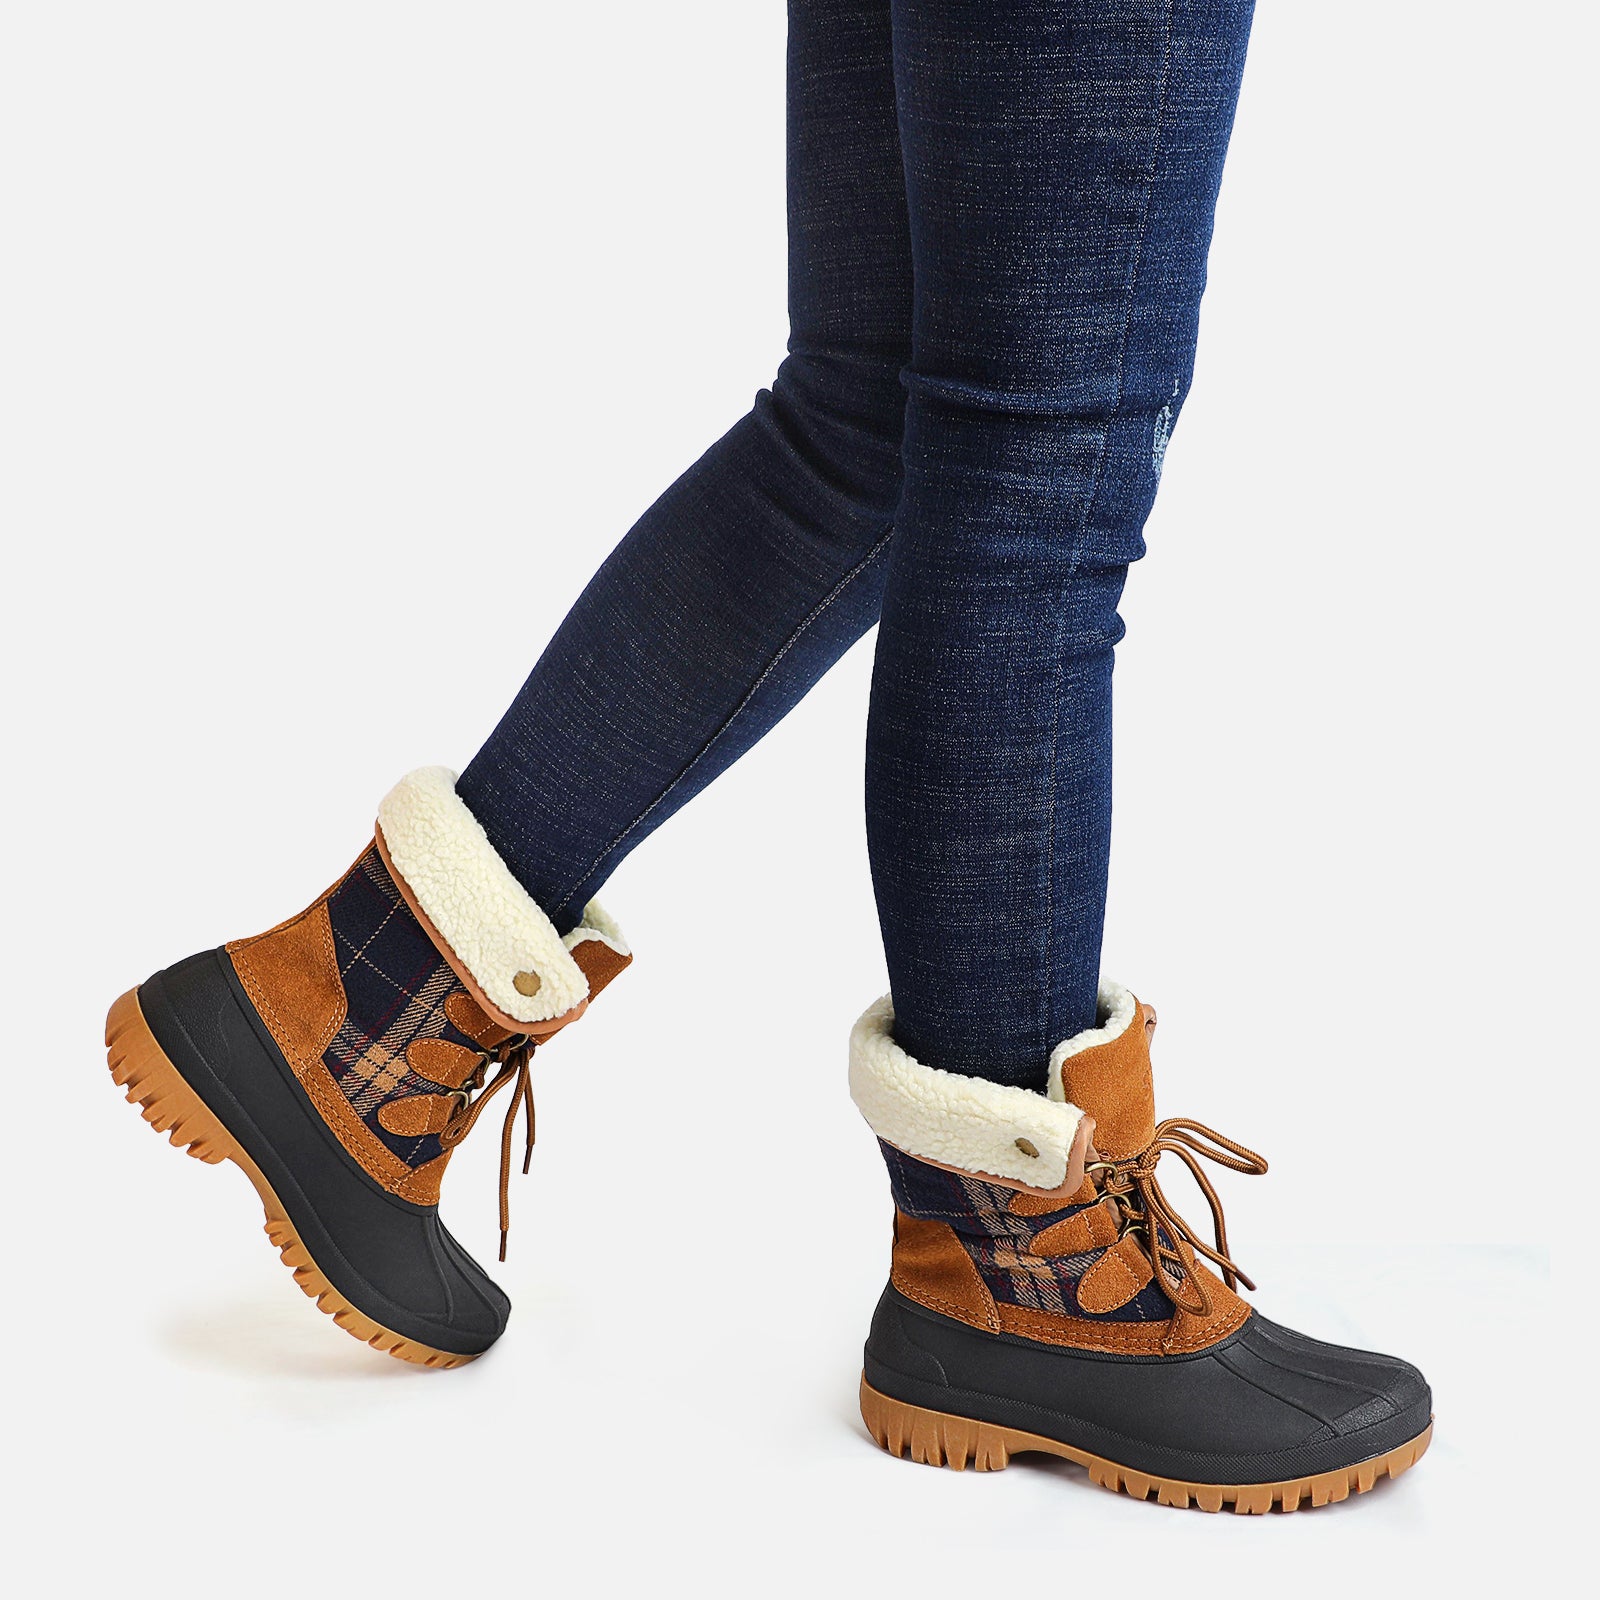 stq-winter-duck-boots-snow-fashion-boot-product-view